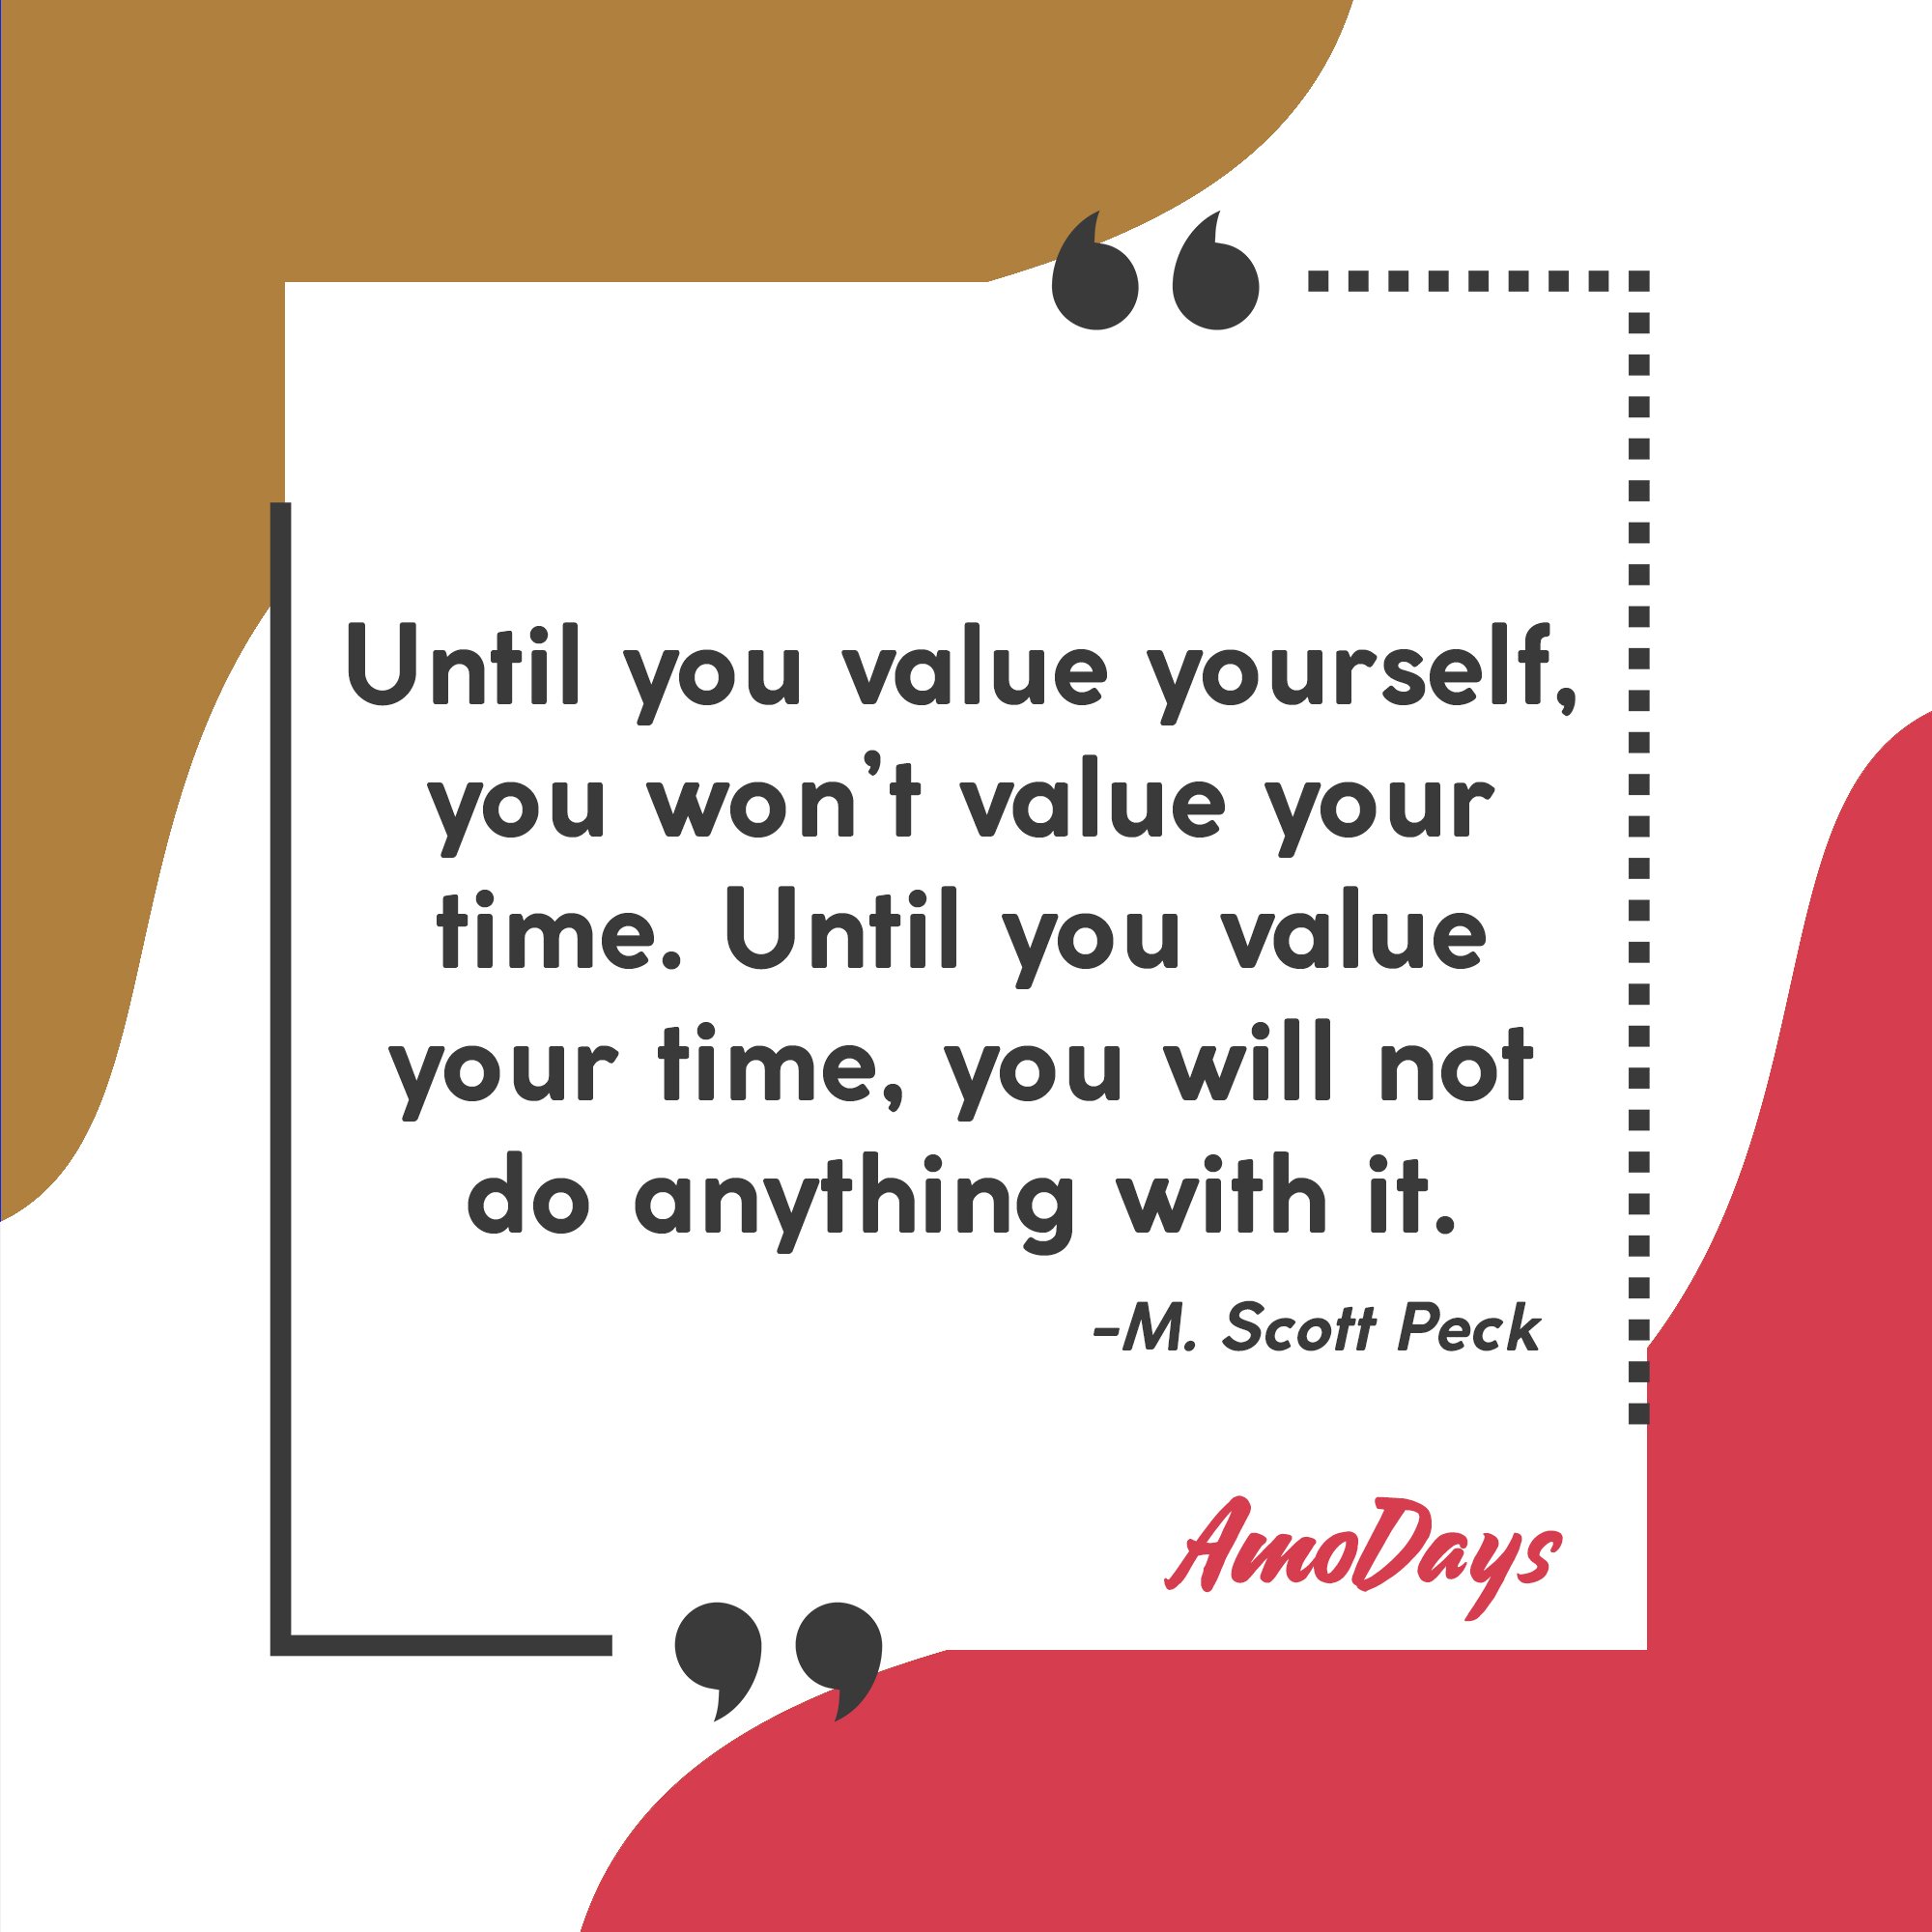 M. Scott Peck's quote “Until you value yourself, you won’t value your time. Until you value your time, you will not do anything with it.” | Image: AmoDays